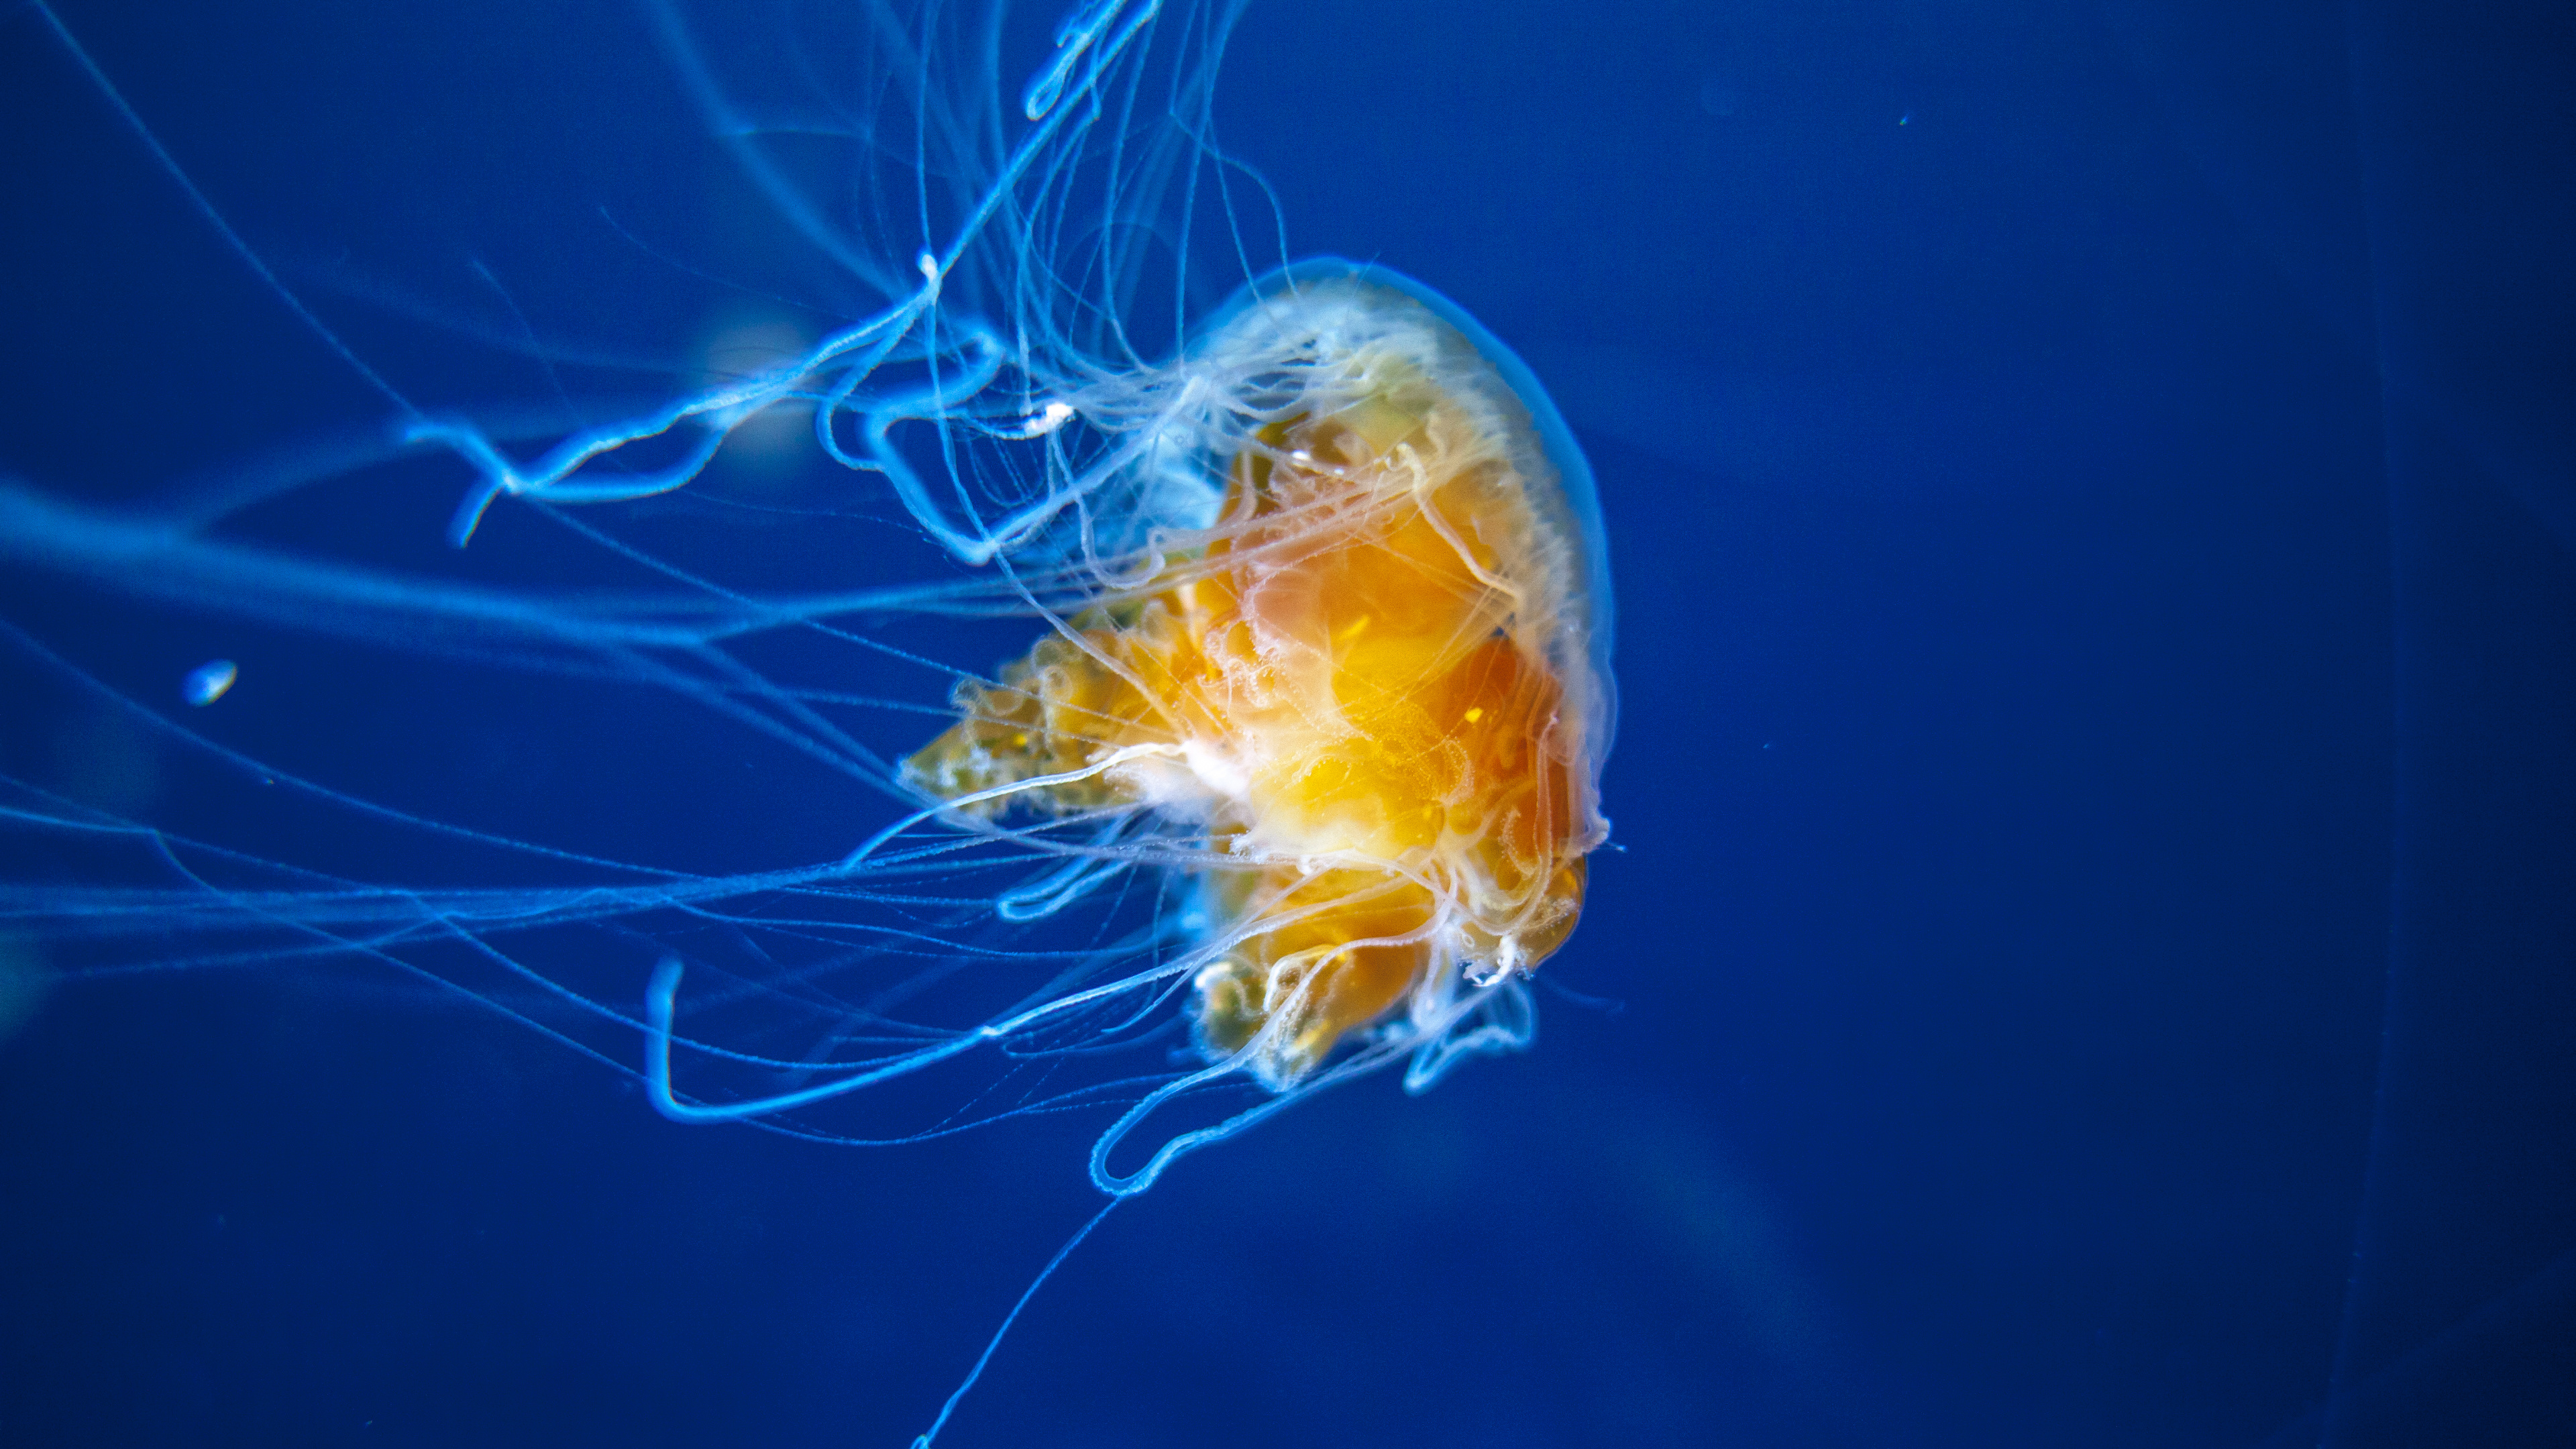 Yellow and White Jellyfish in Blue Water. Wallpaper in 3840x2160 Resolution